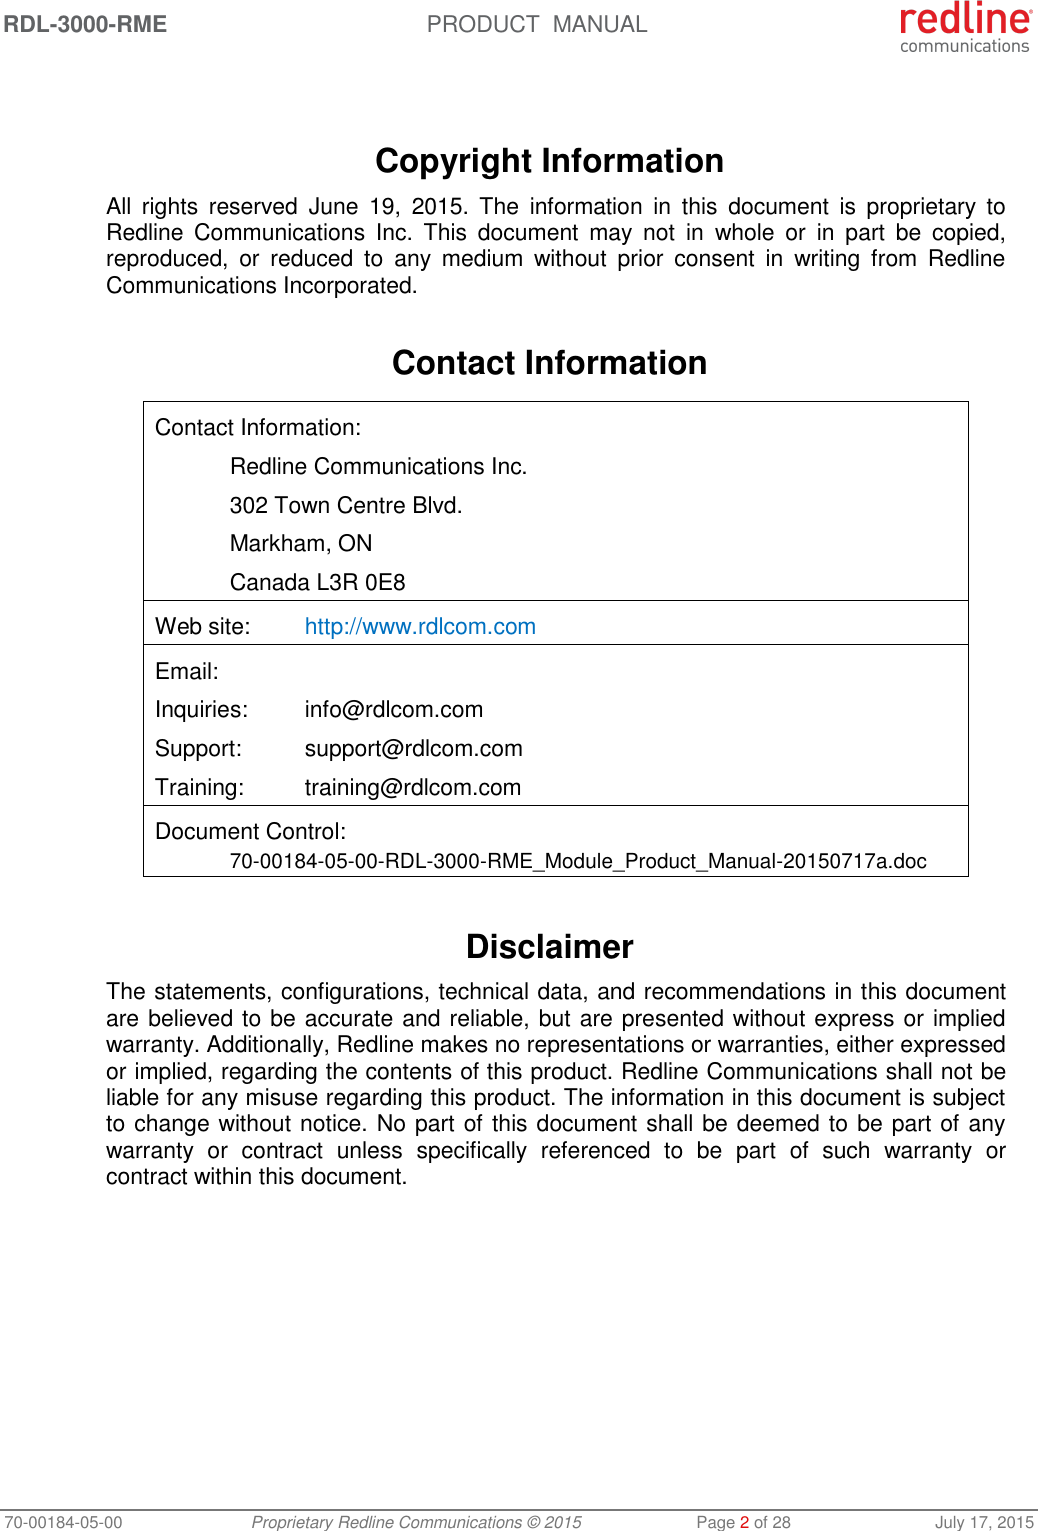 RDL-3000-RME  PRODUCT  MANUAL 70-00184-05-00 Proprietary Redline Communications © 2015  Page 2 of 28  July 17, 2015    Copyright Information All  rights  reserved  June  19,  2015.  The  information  in  this  document  is  proprietary  to Redline  Communications  Inc.  This  document  may  not  in  whole  or  in  part  be  copied, reproduced,  or  reduced  to  any  medium  without  prior  consent  in  writing  from  Redline Communications Incorporated.  Contact Information  Contact Information:   Redline Communications Inc.   302 Town Centre Blvd.   Markham, ON   Canada L3R 0E8 Web site:  http://www.rdlcom.com Email: Inquiries:  info@rdlcom.com  Support:  support@rdlcom.com  Training:  training@rdlcom.com Document Control:  70-00184-05-00-RDL-3000-RME_Module_Product_Manual-20150717a.doc  Disclaimer The statements, configurations, technical data, and recommendations in this document are believed to be accurate and reliable, but are presented without express or implied warranty. Additionally, Redline makes no representations or warranties, either expressed or implied, regarding the contents of this product. Redline Communications shall not be liable for any misuse regarding this product. The information in this document is subject to change without notice. No part of this document shall be deemed to be part of any warranty  or  contract  unless  specifically  referenced  to  be  part  of  such  warranty  or contract within this document. 